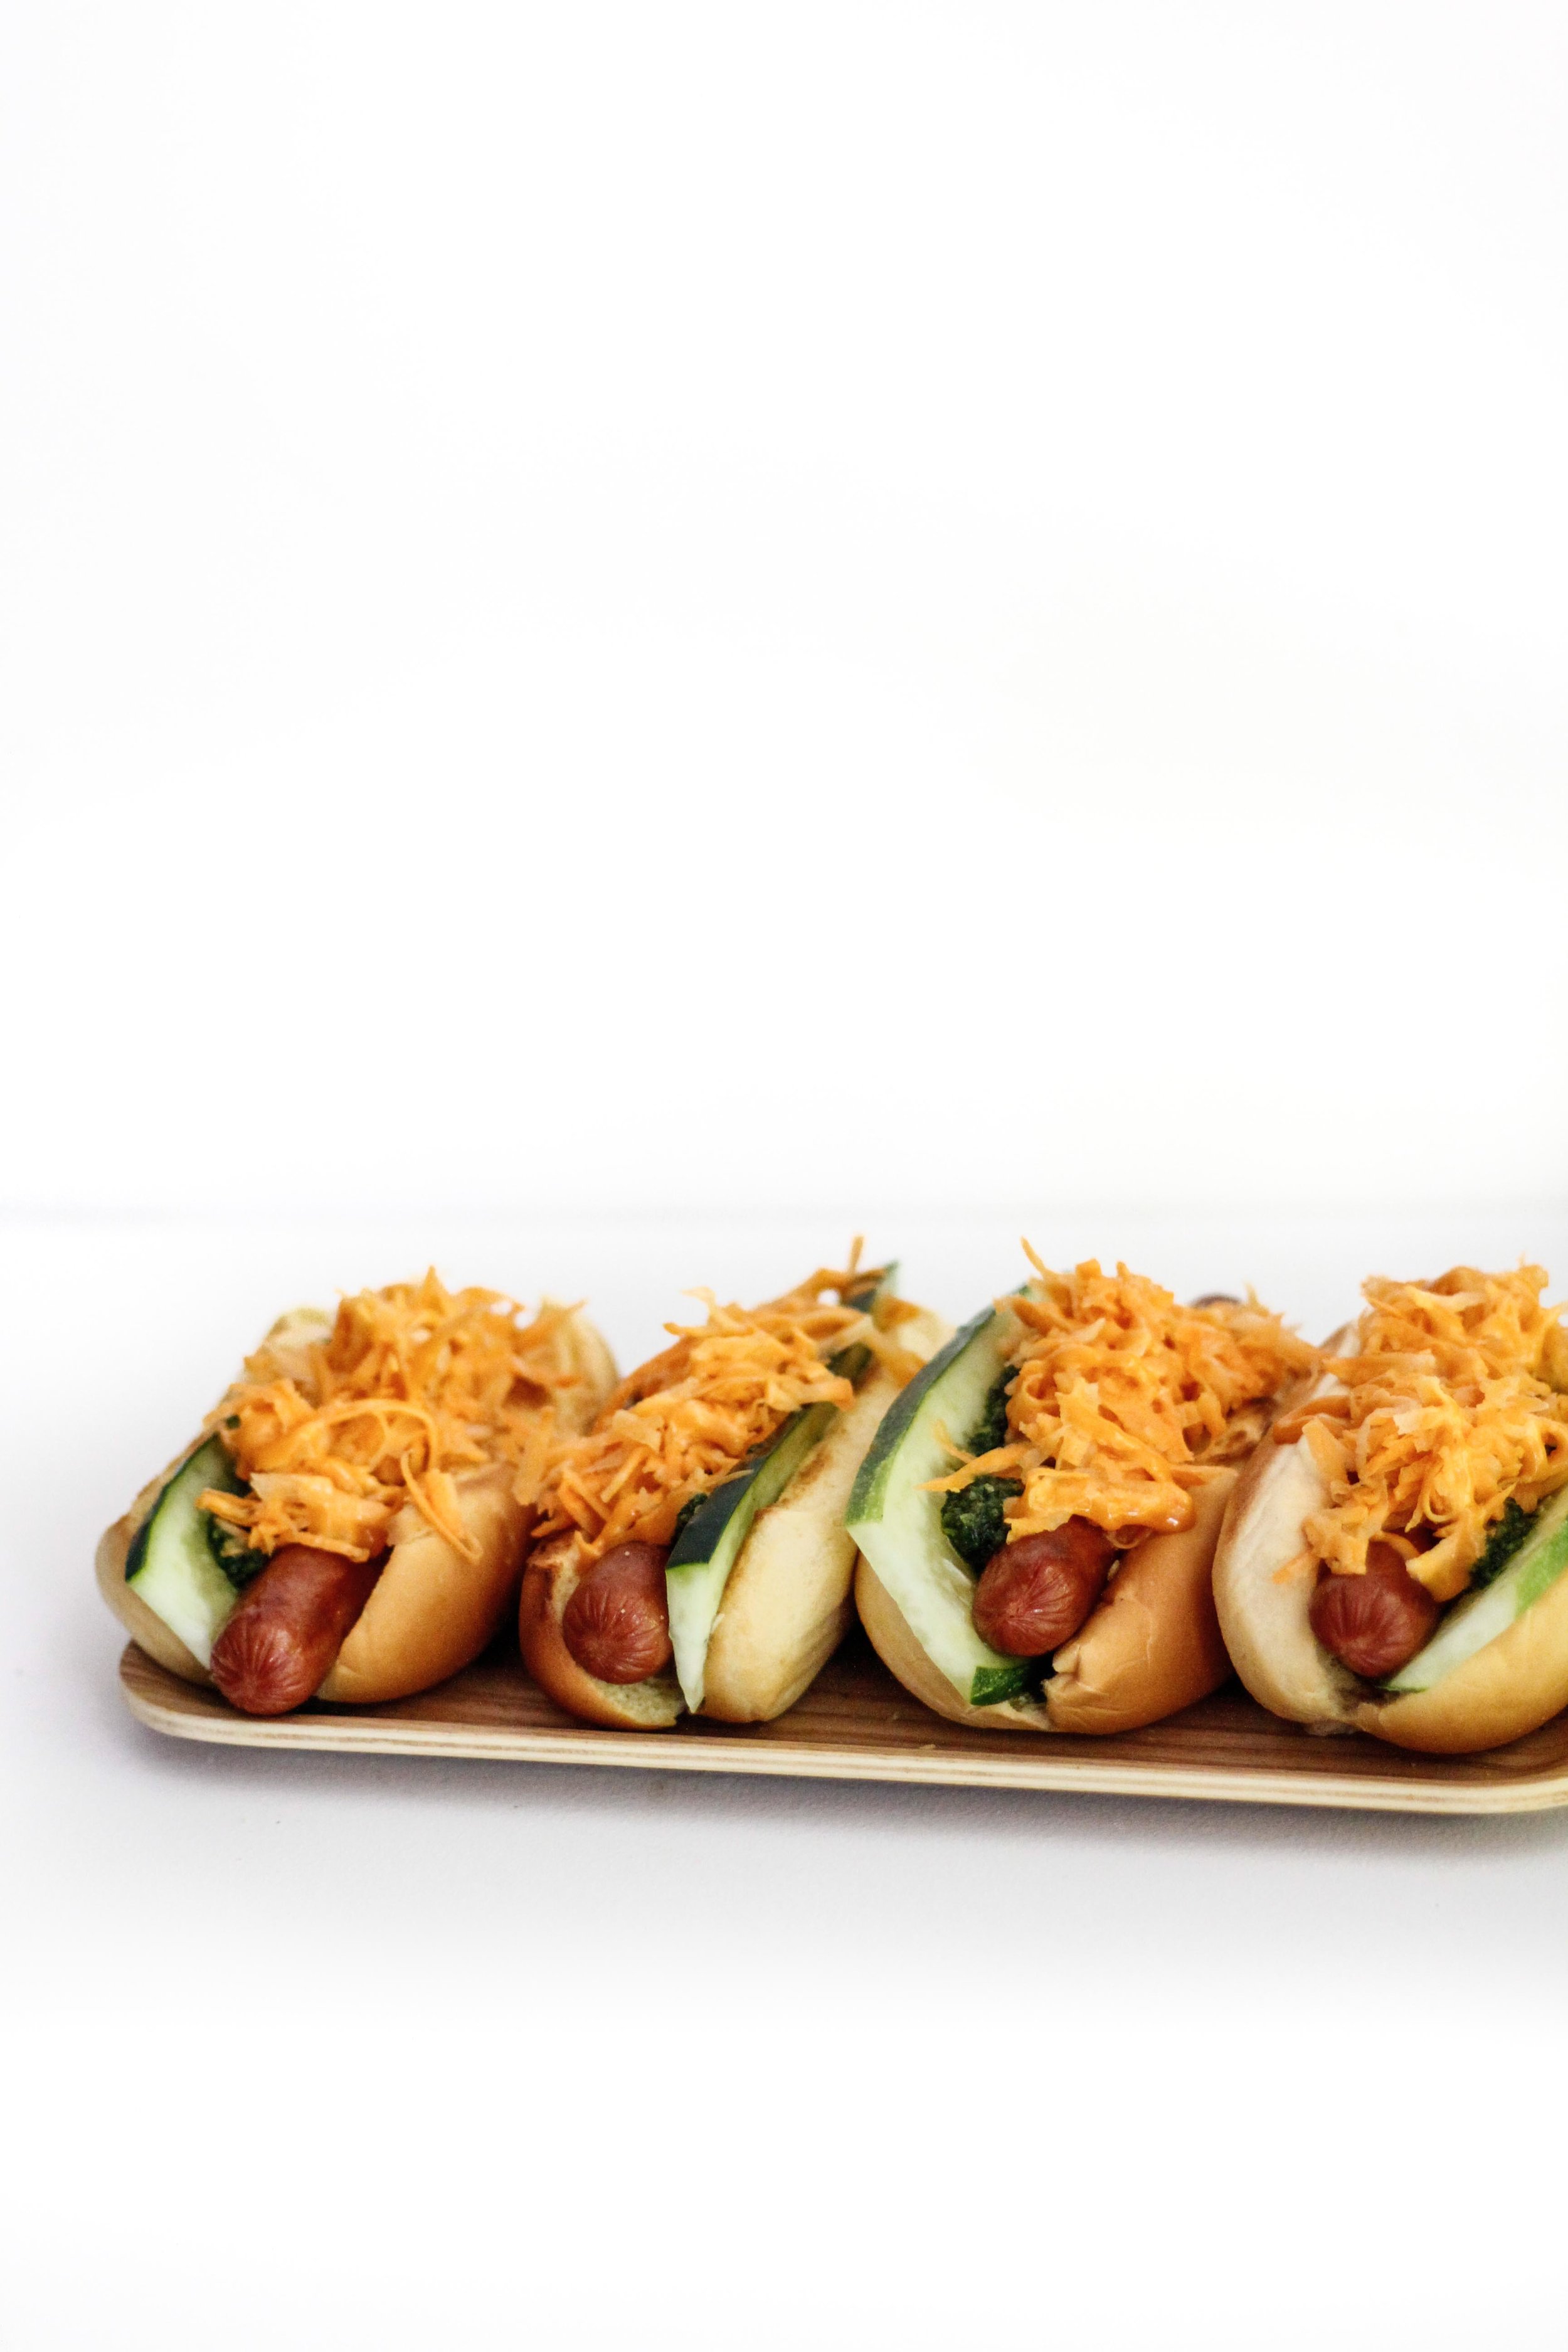 Banh mi-style hot dogs